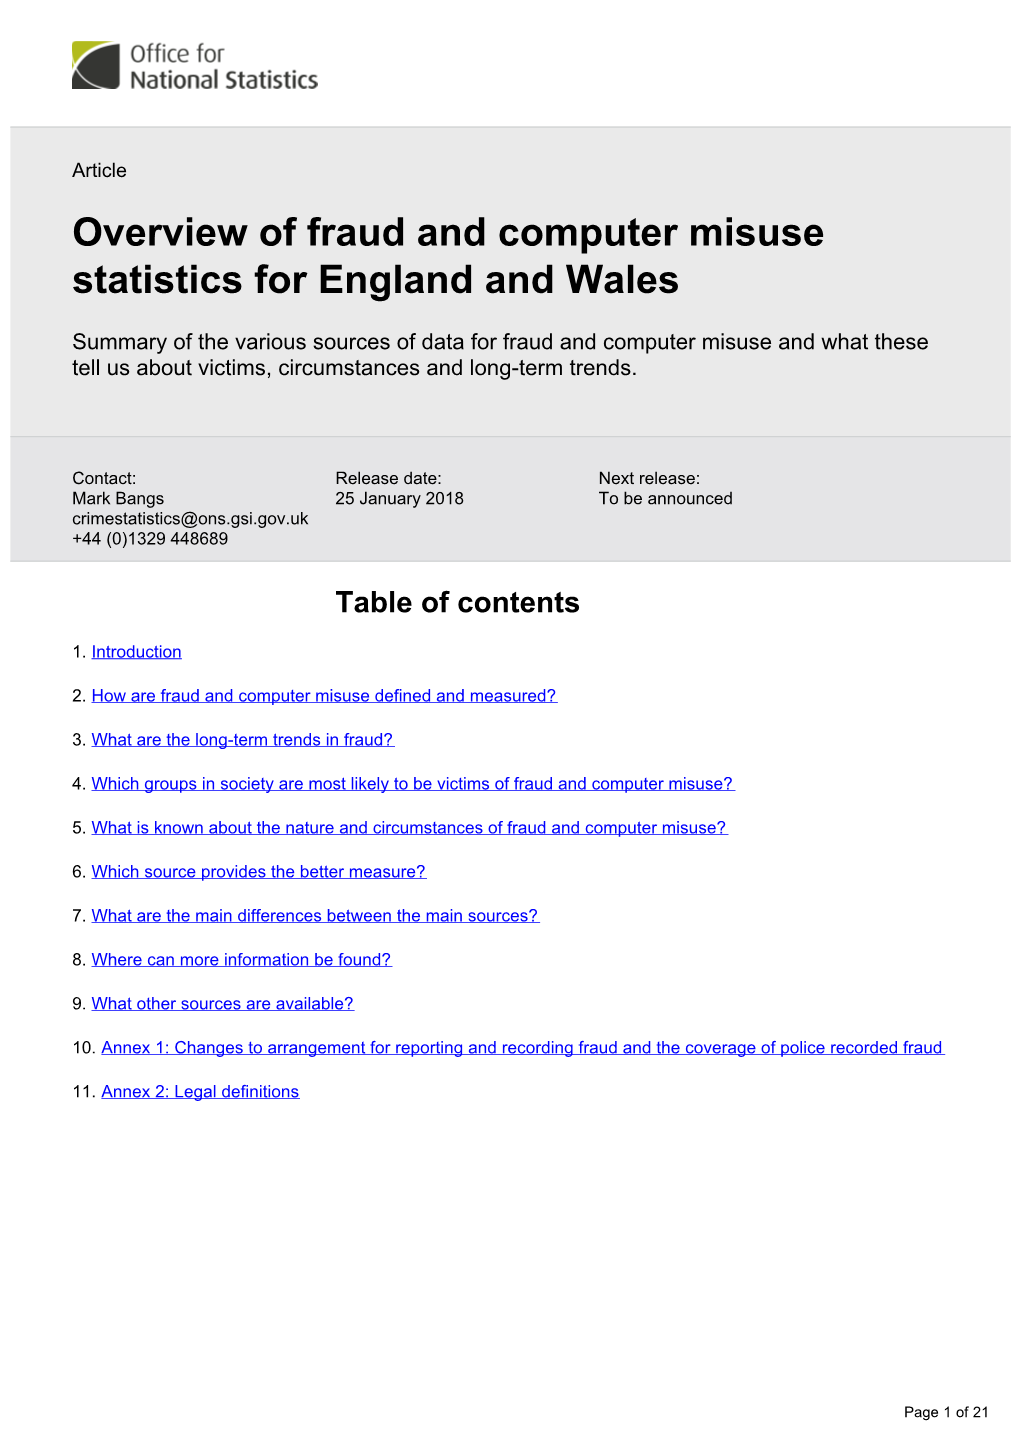 Overview of Fraud and Computer Misuse Statistics for England and Wales